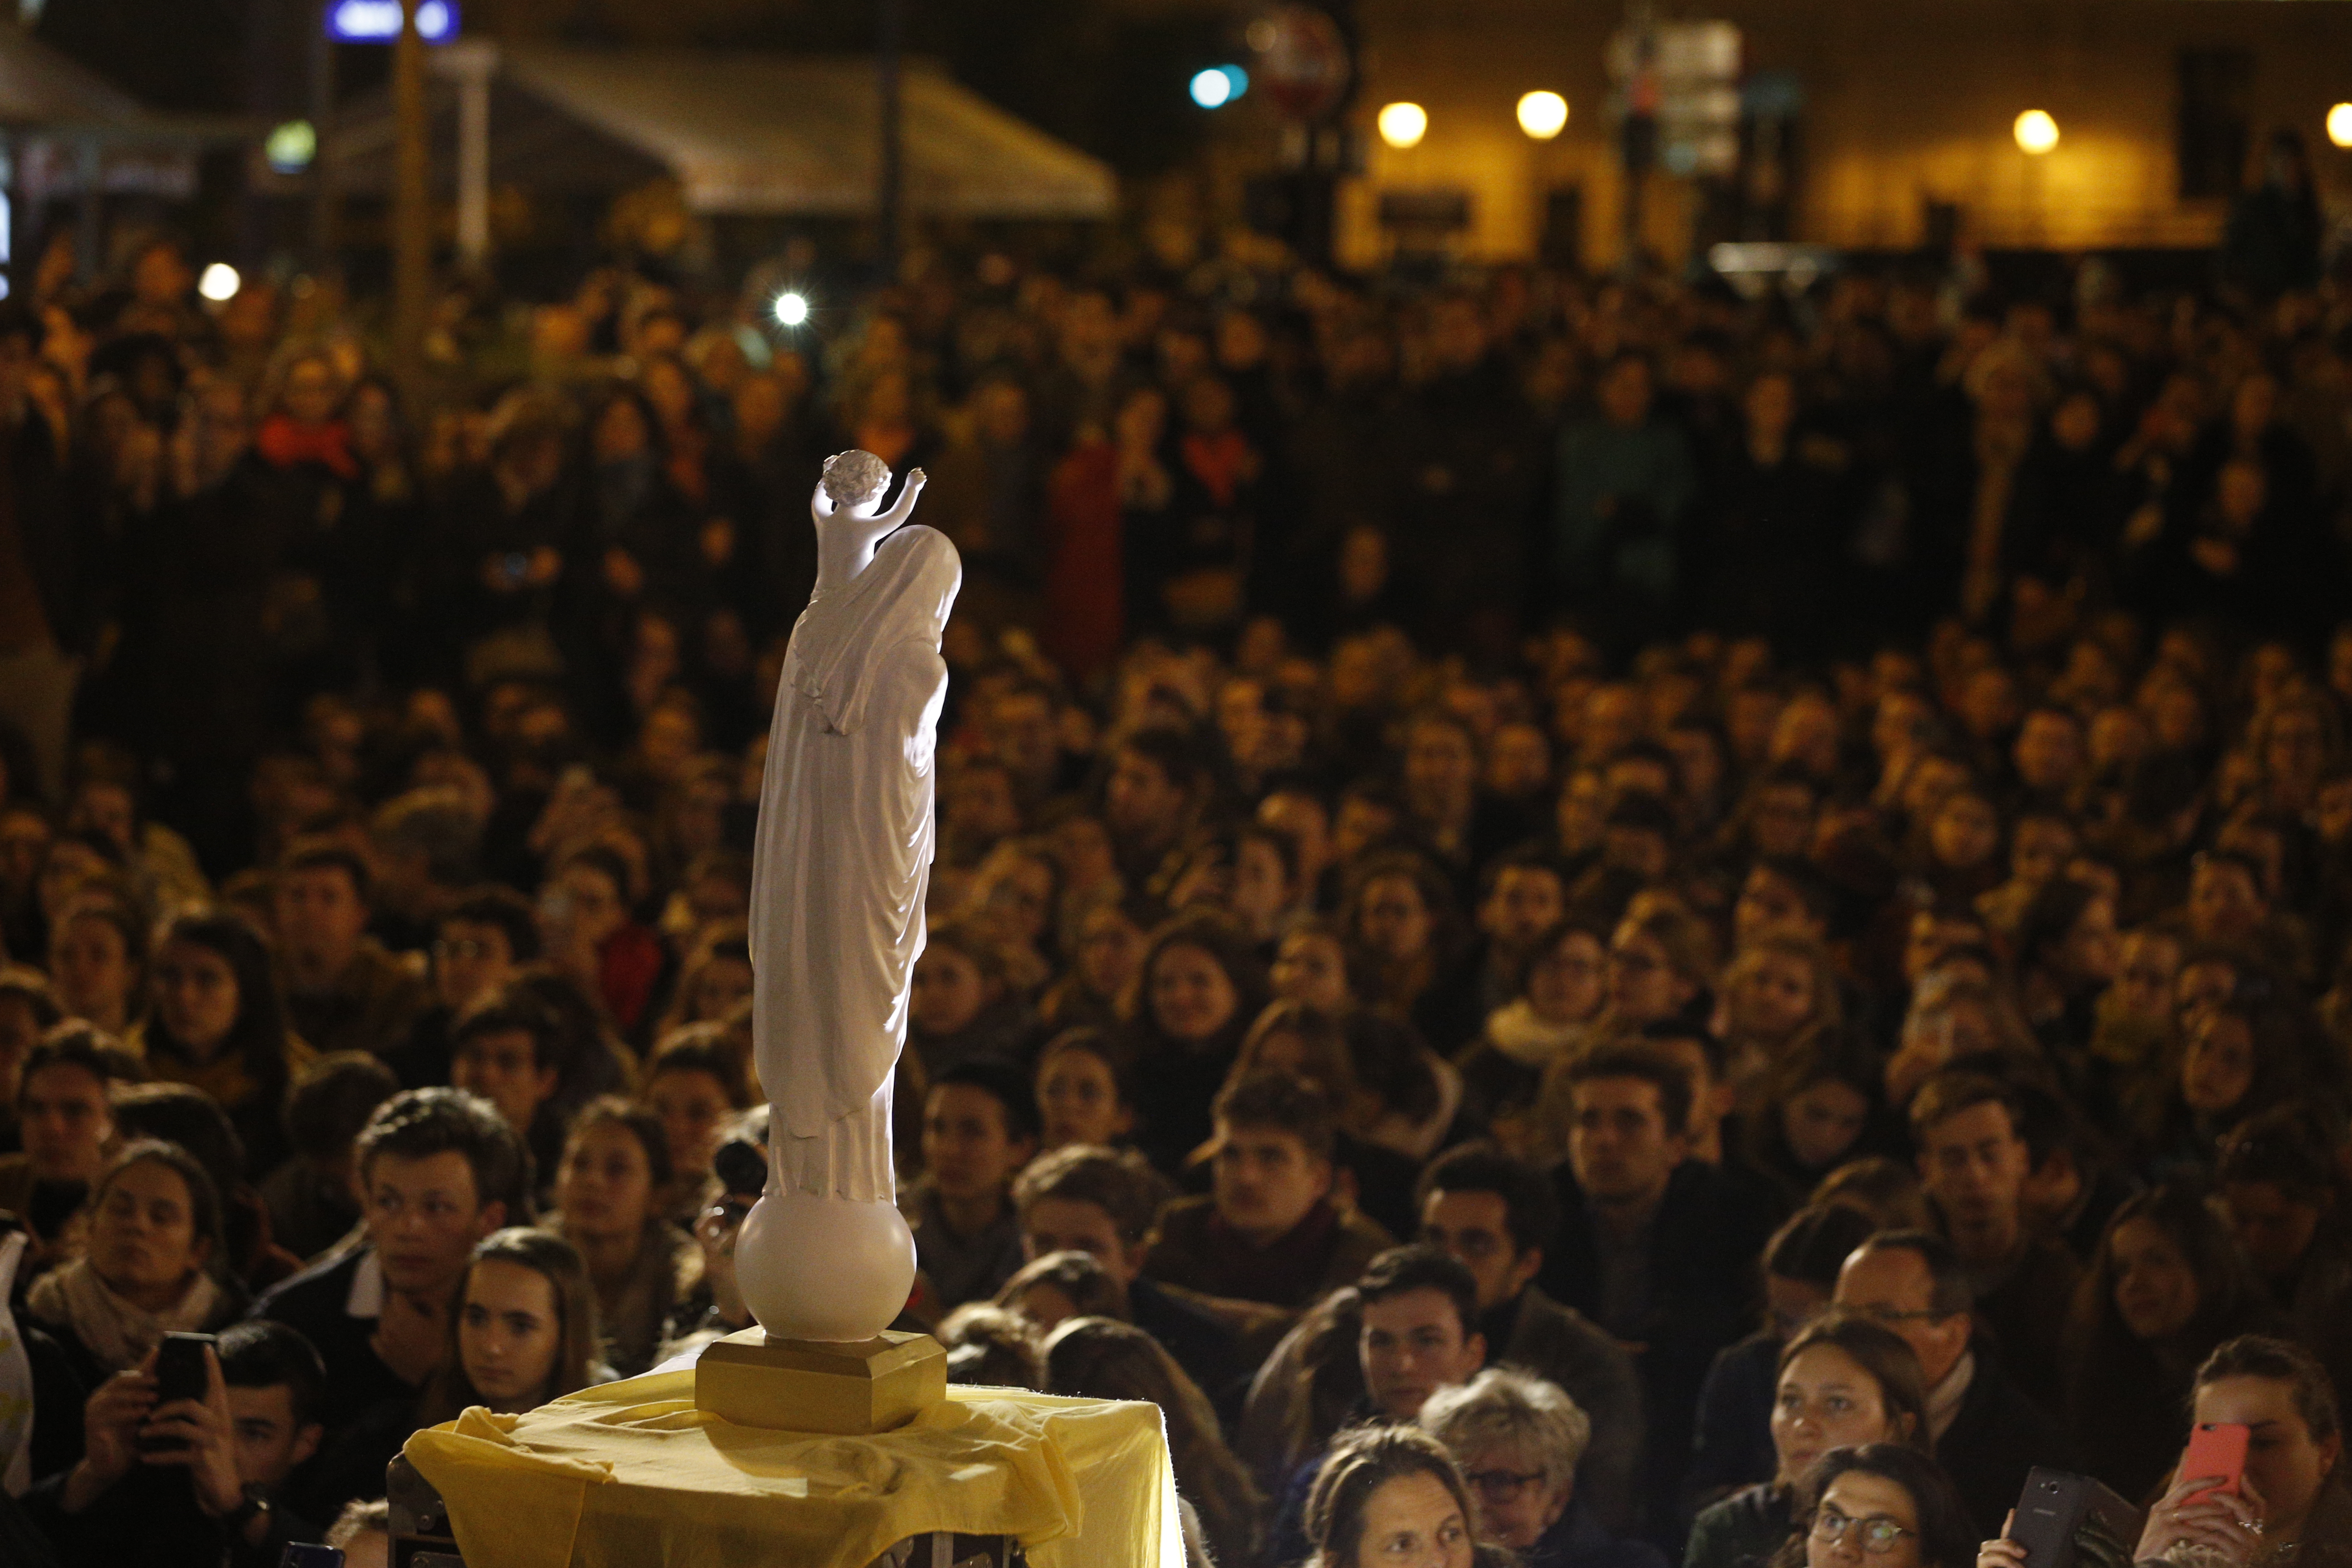 Archbishop invites Parisians to light a candle to dispel fire's darkness